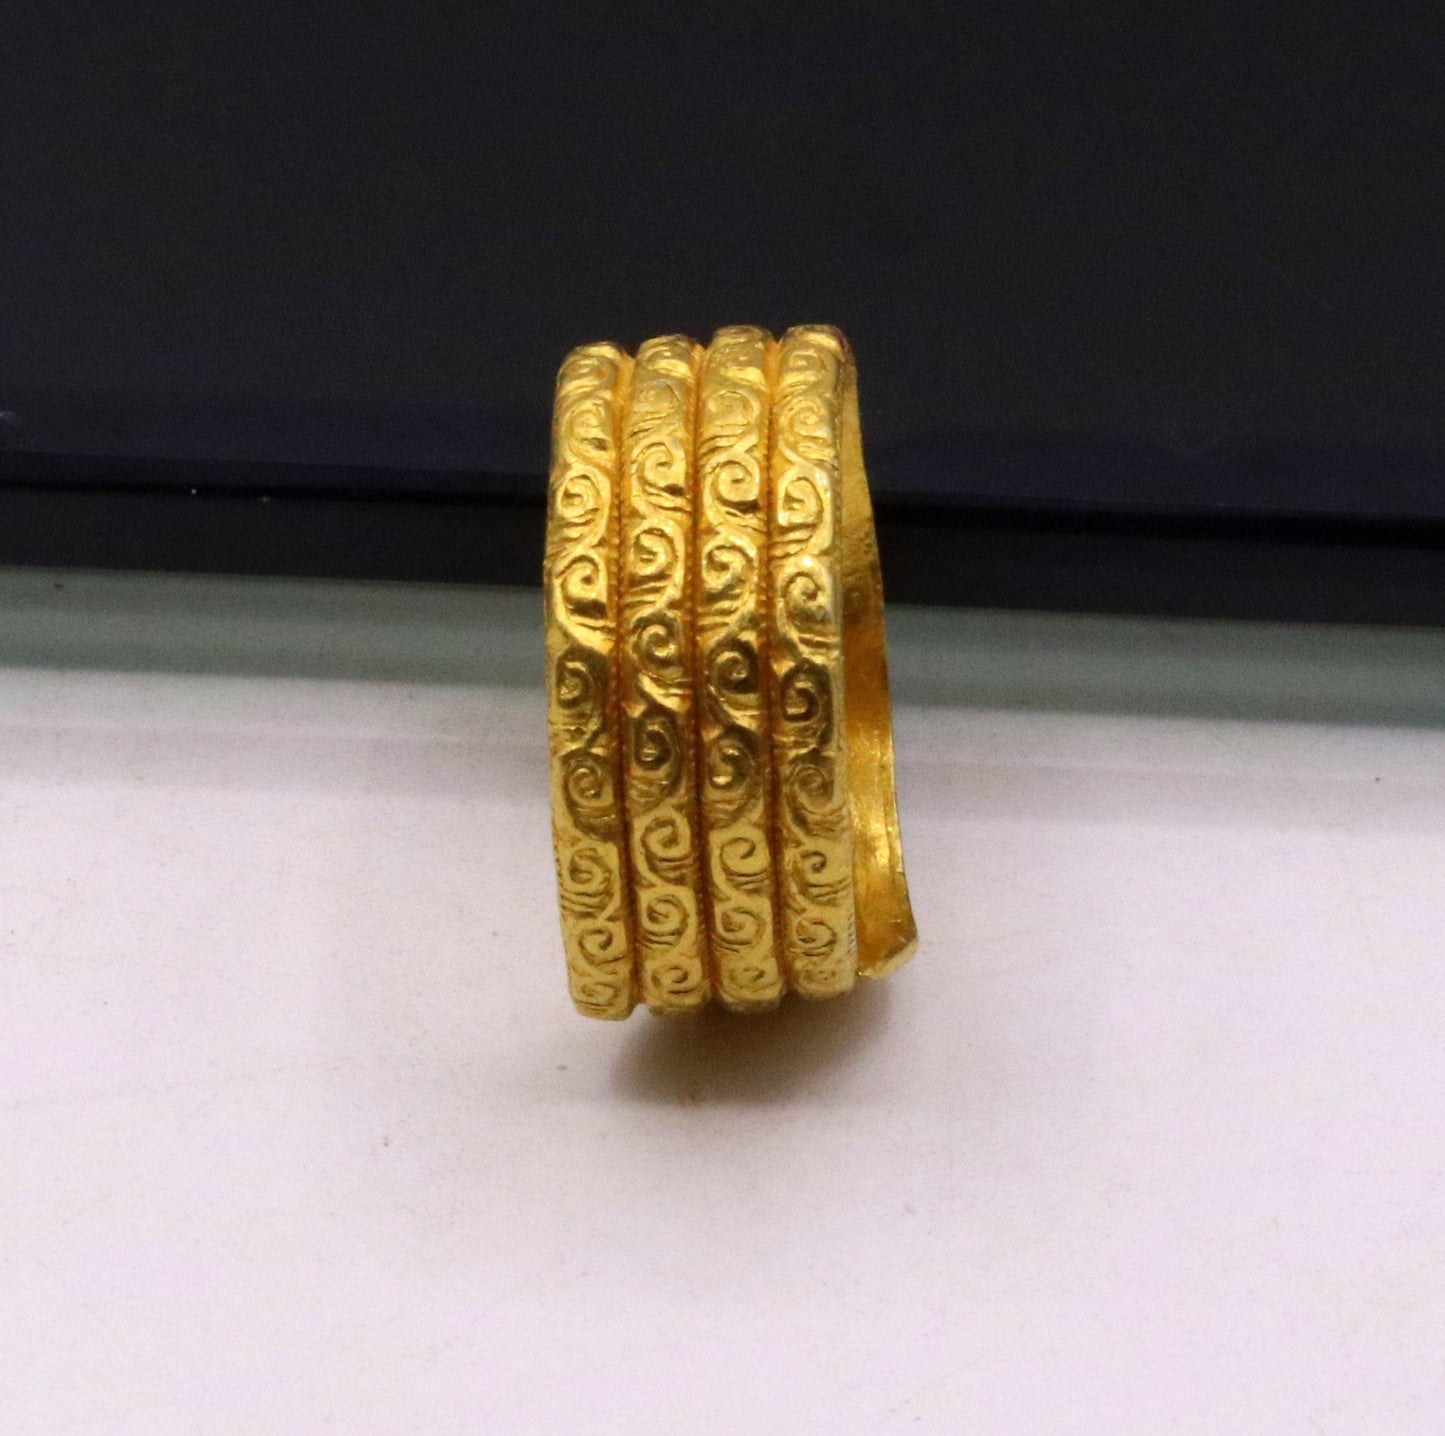 Vintage 22k carat yellow gold handmade unique traditional design ring band indian tribal unisex jewelry without stone - TRIBAL ORNAMENTS